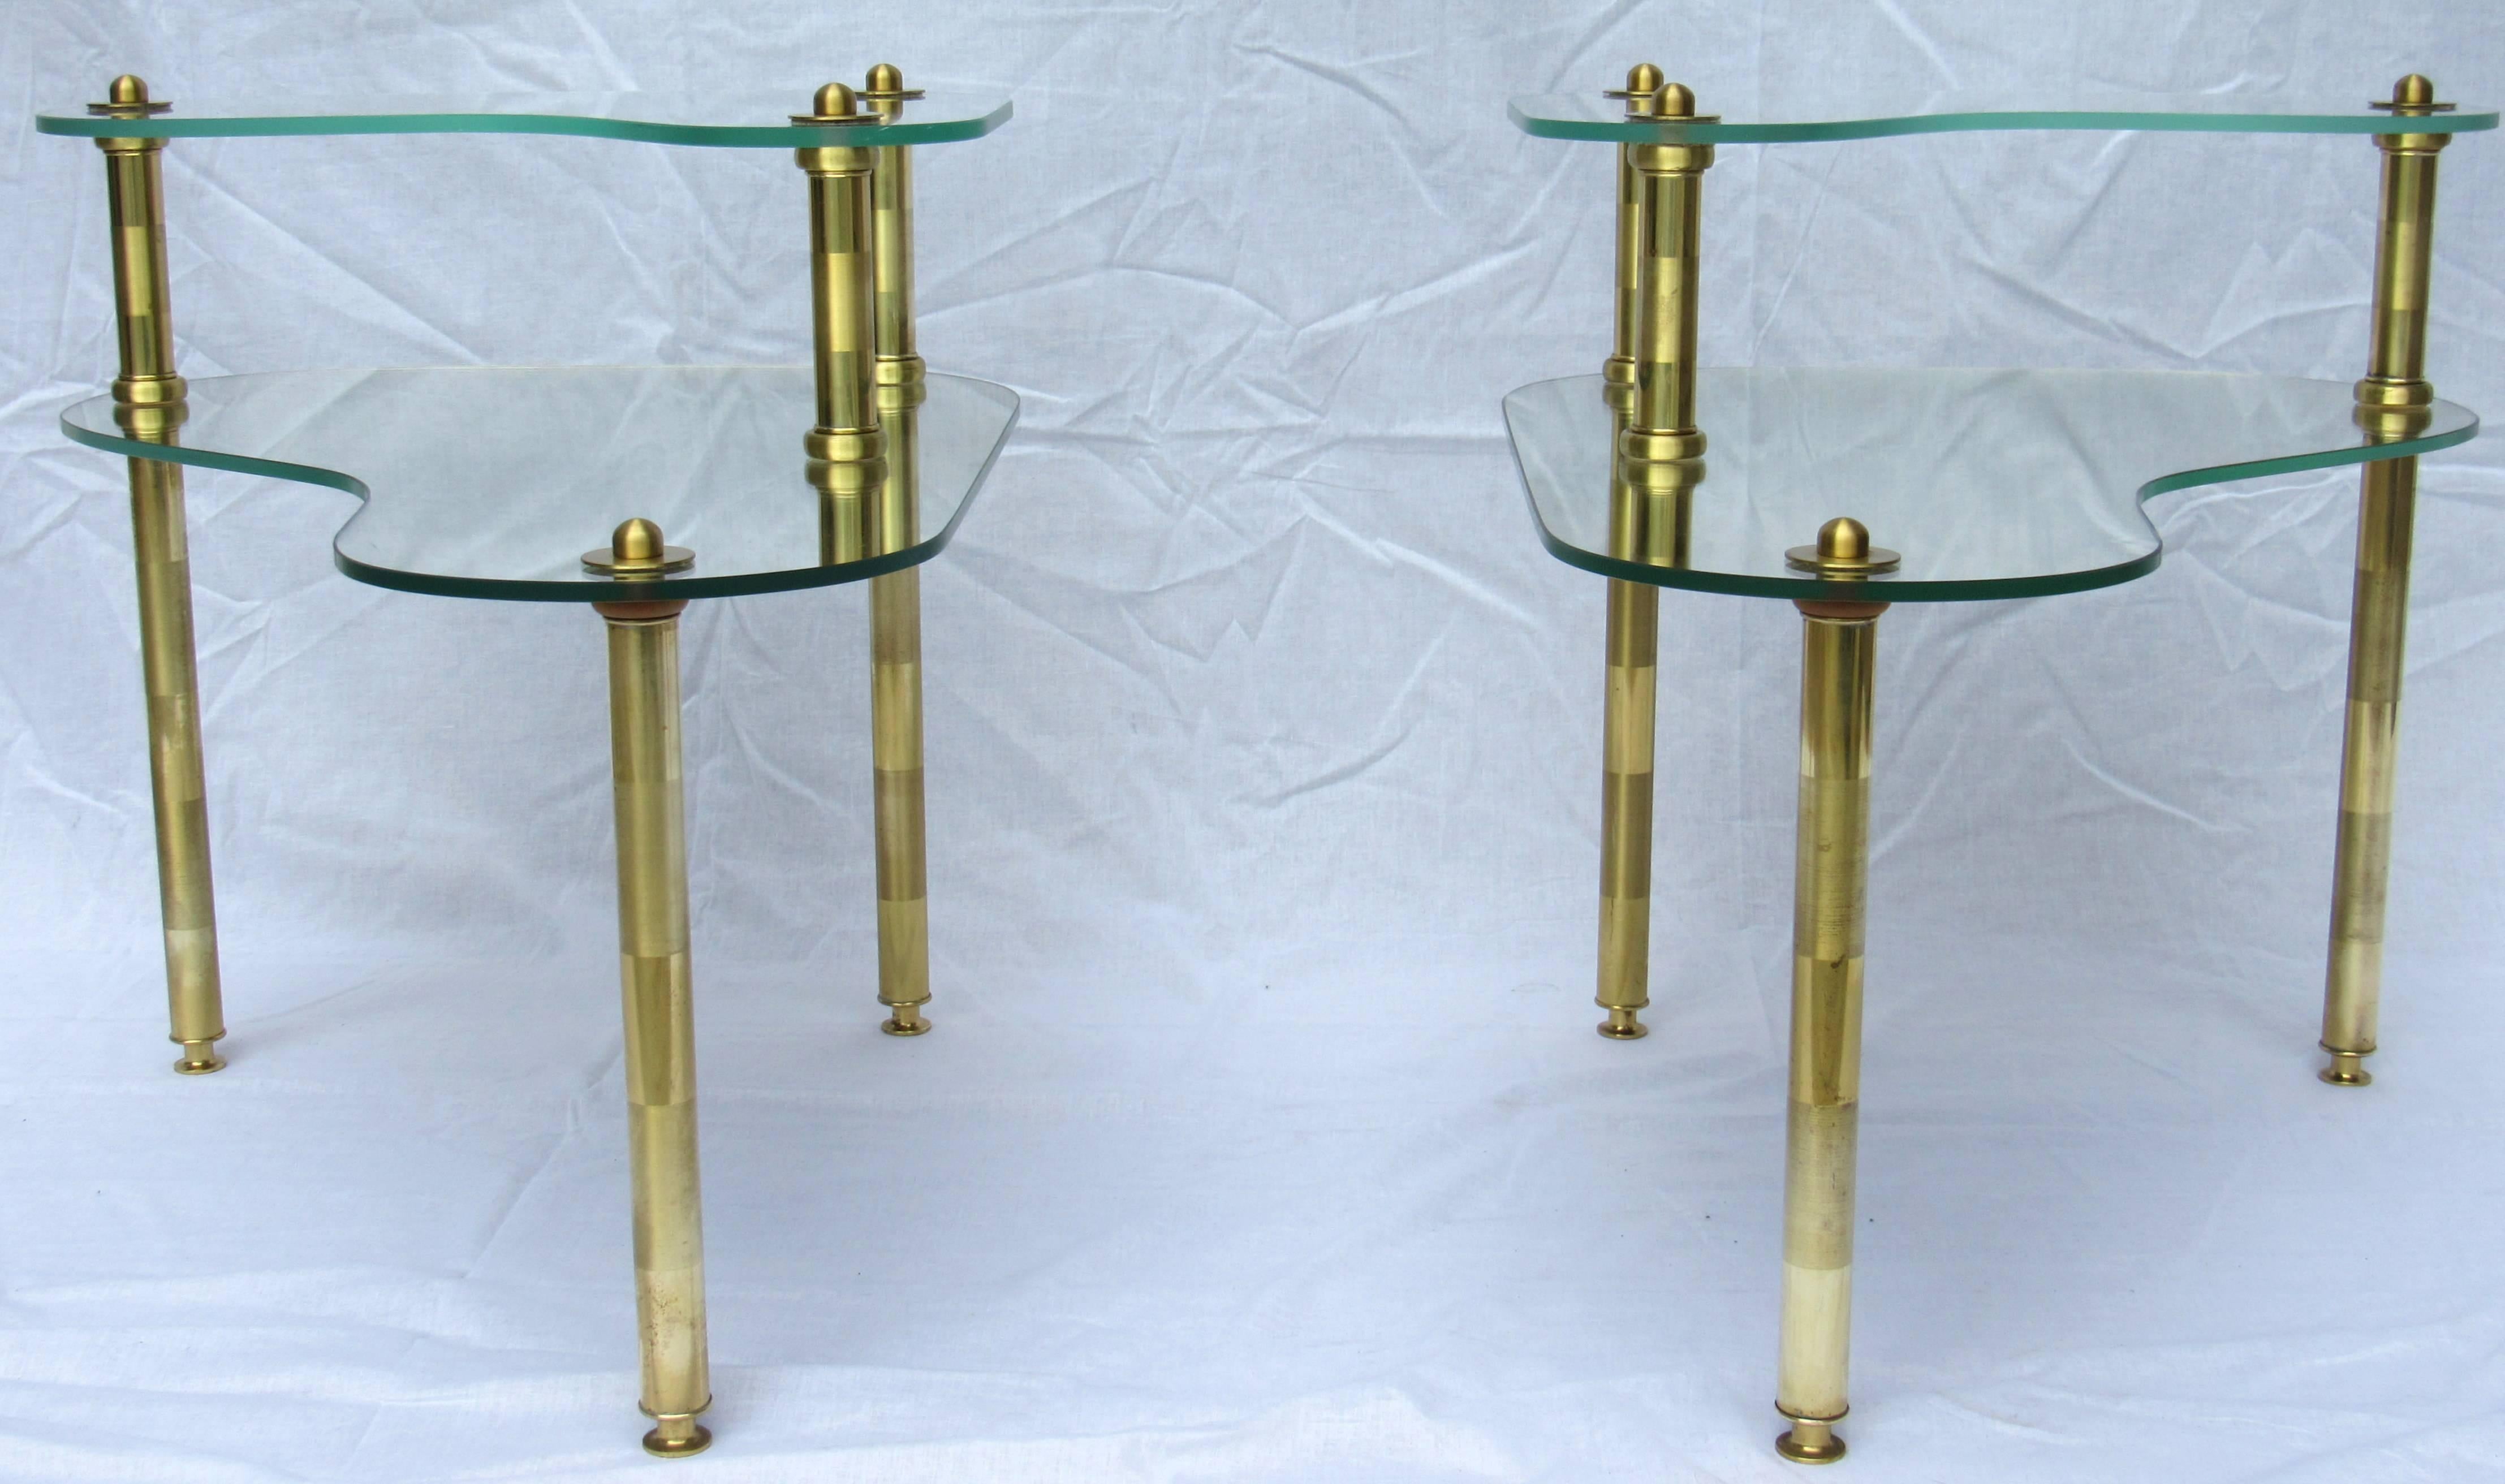 Semon Bache Pair of Chased Brass and Mirrored Glass End Tables from 1959 For Sale 2